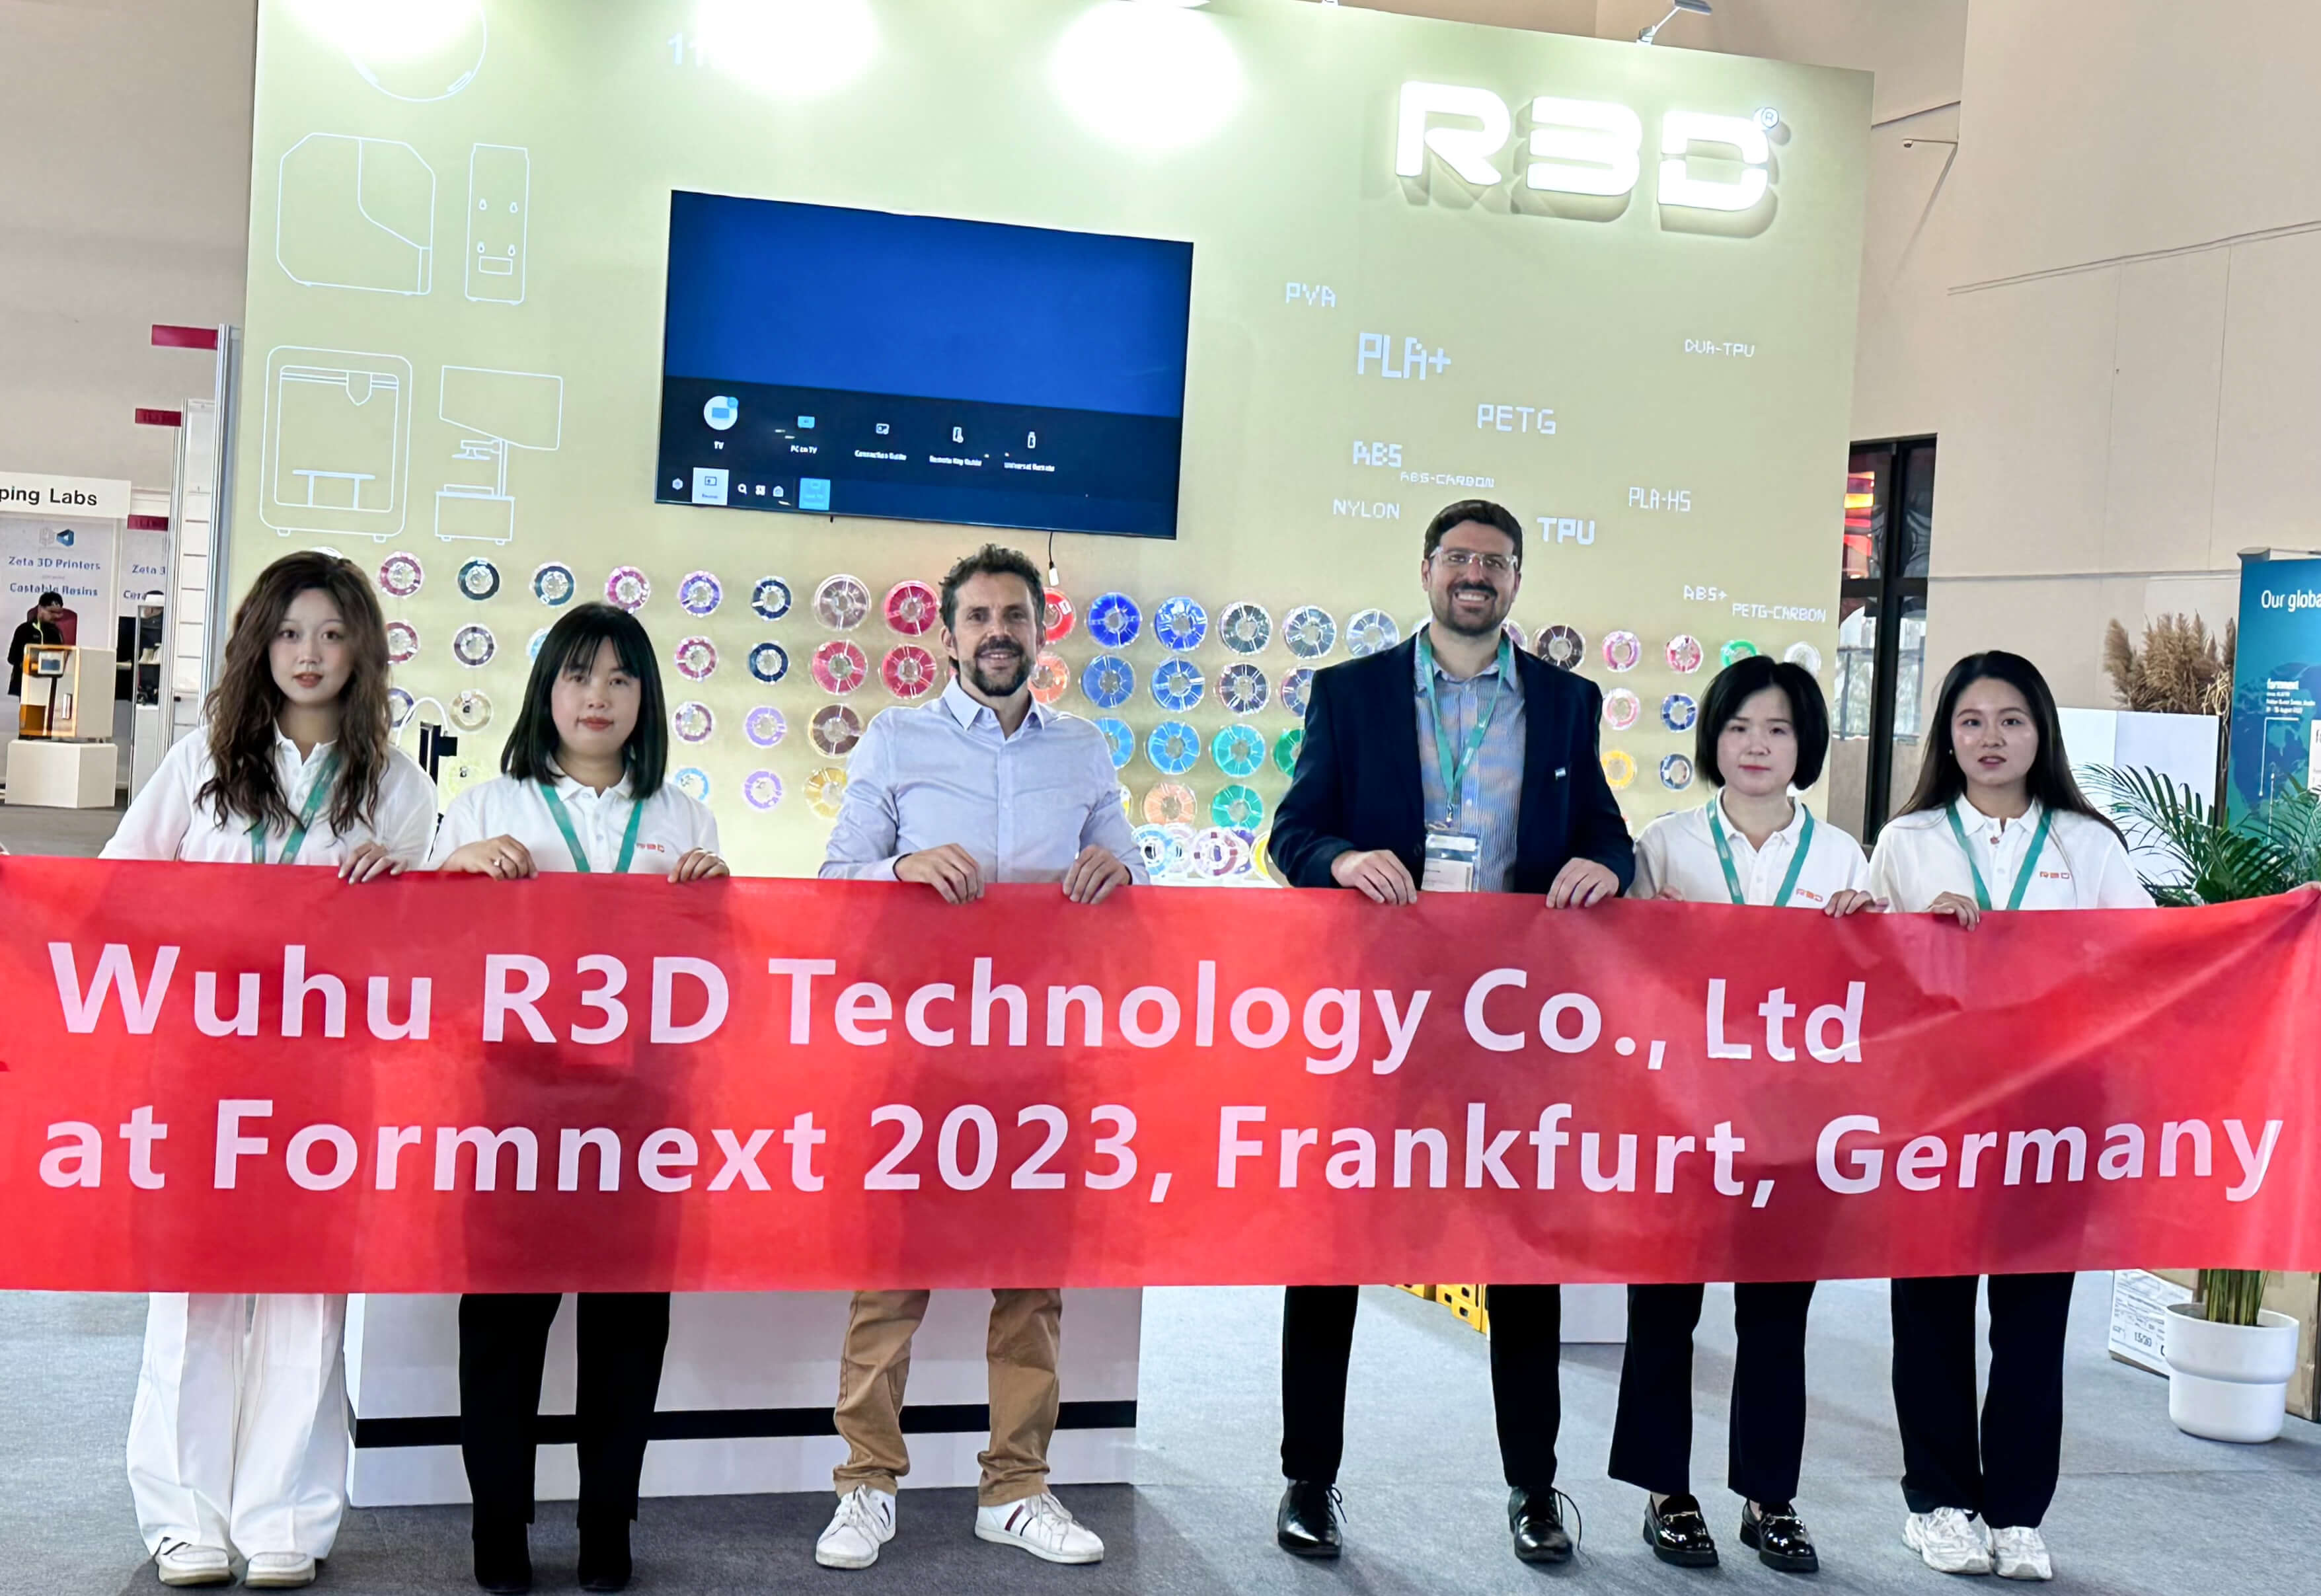 R3D Makes a Remarkable Appearance at the 2023 Formnext Exhibition in Frankfurt, Germany with Its Array of New Products